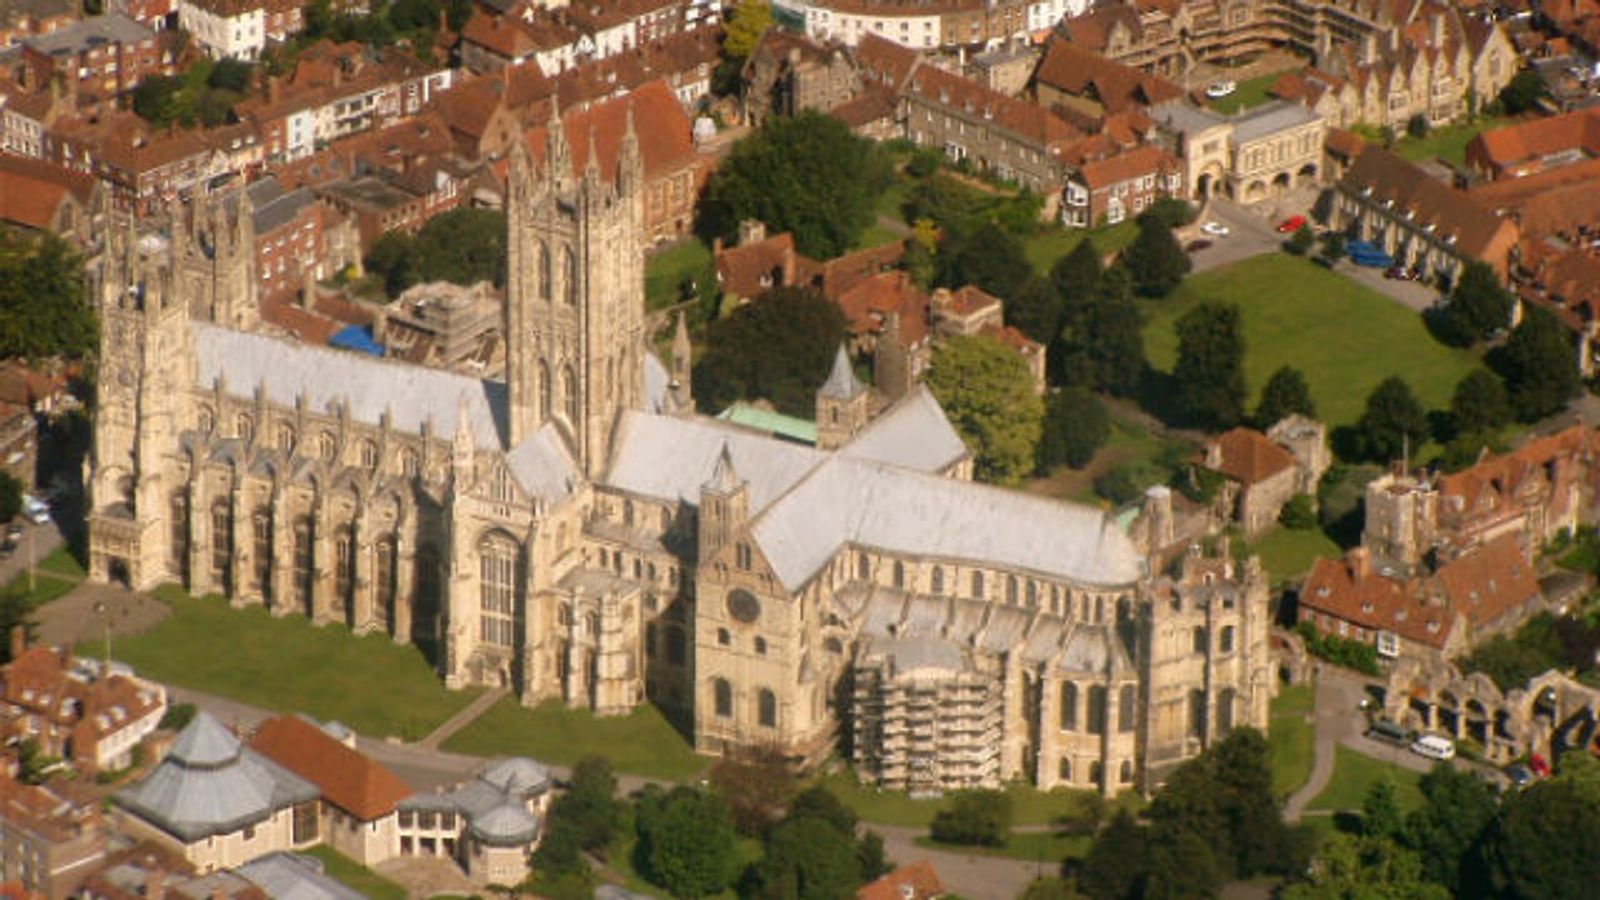 Canterbury Cathedral Blocks Porn on WiFi Network